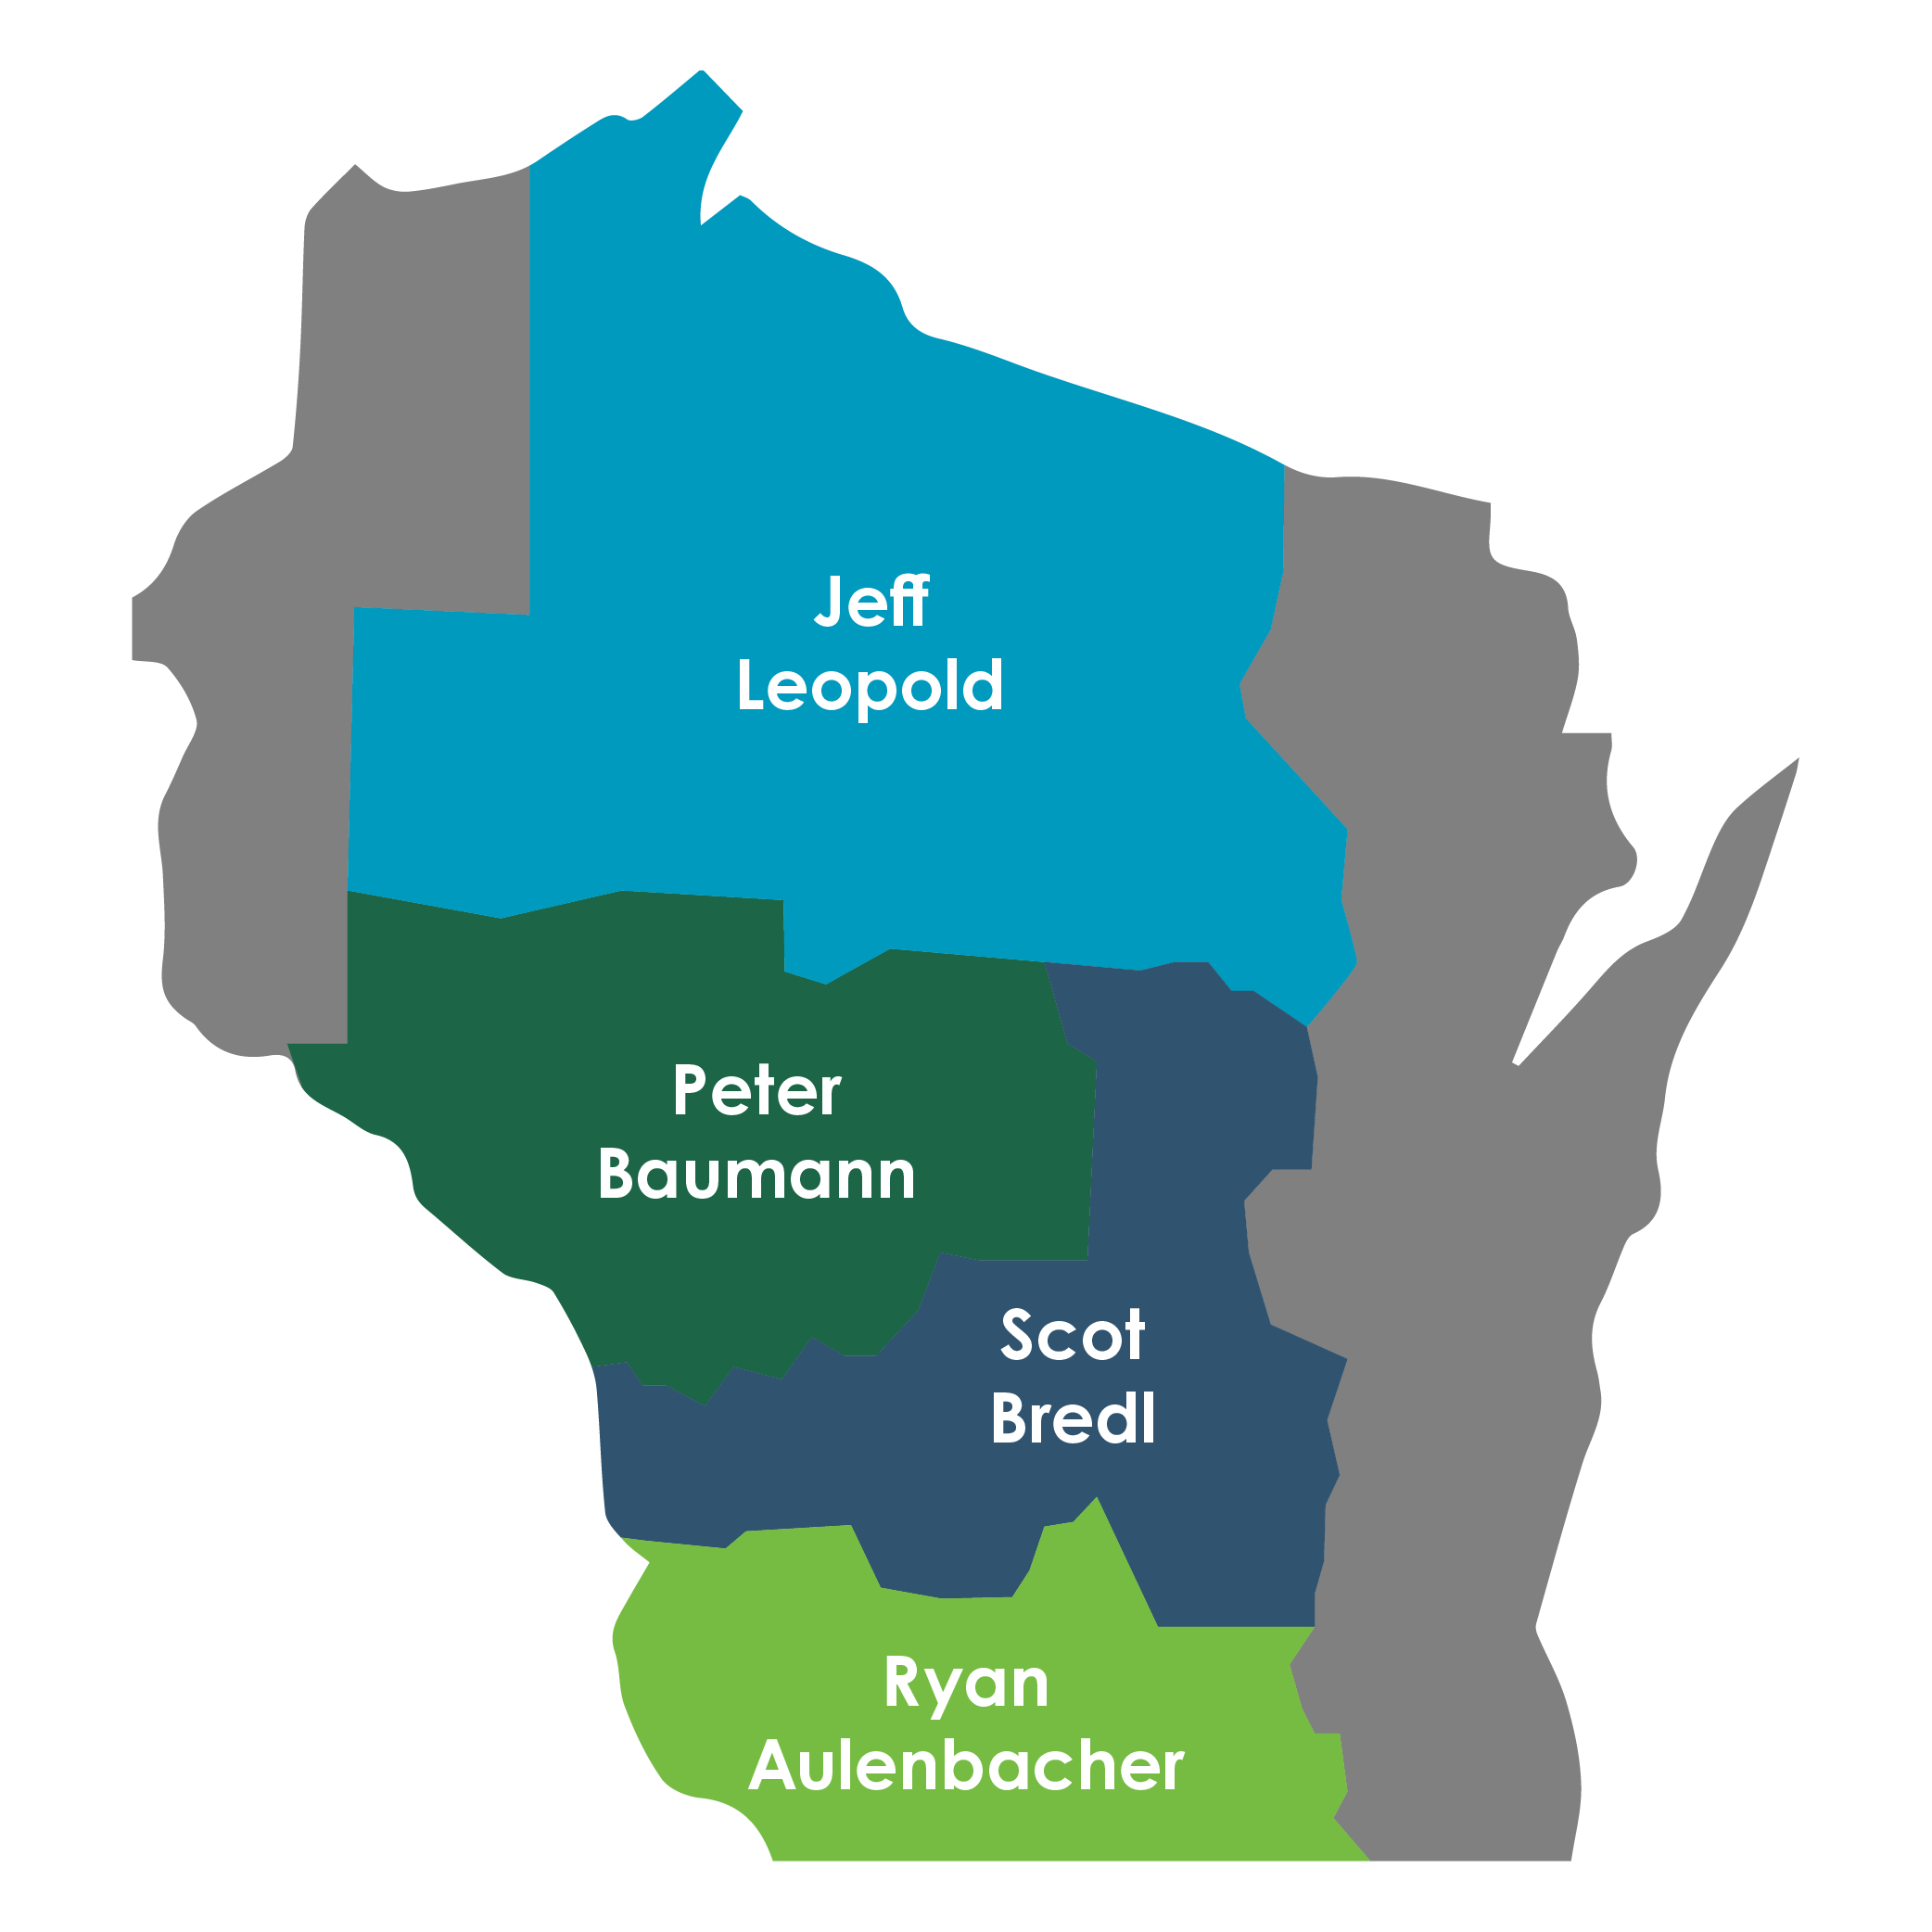 Green Bay Packaging's Wausau Division markets we serve in the Wisconsin area.